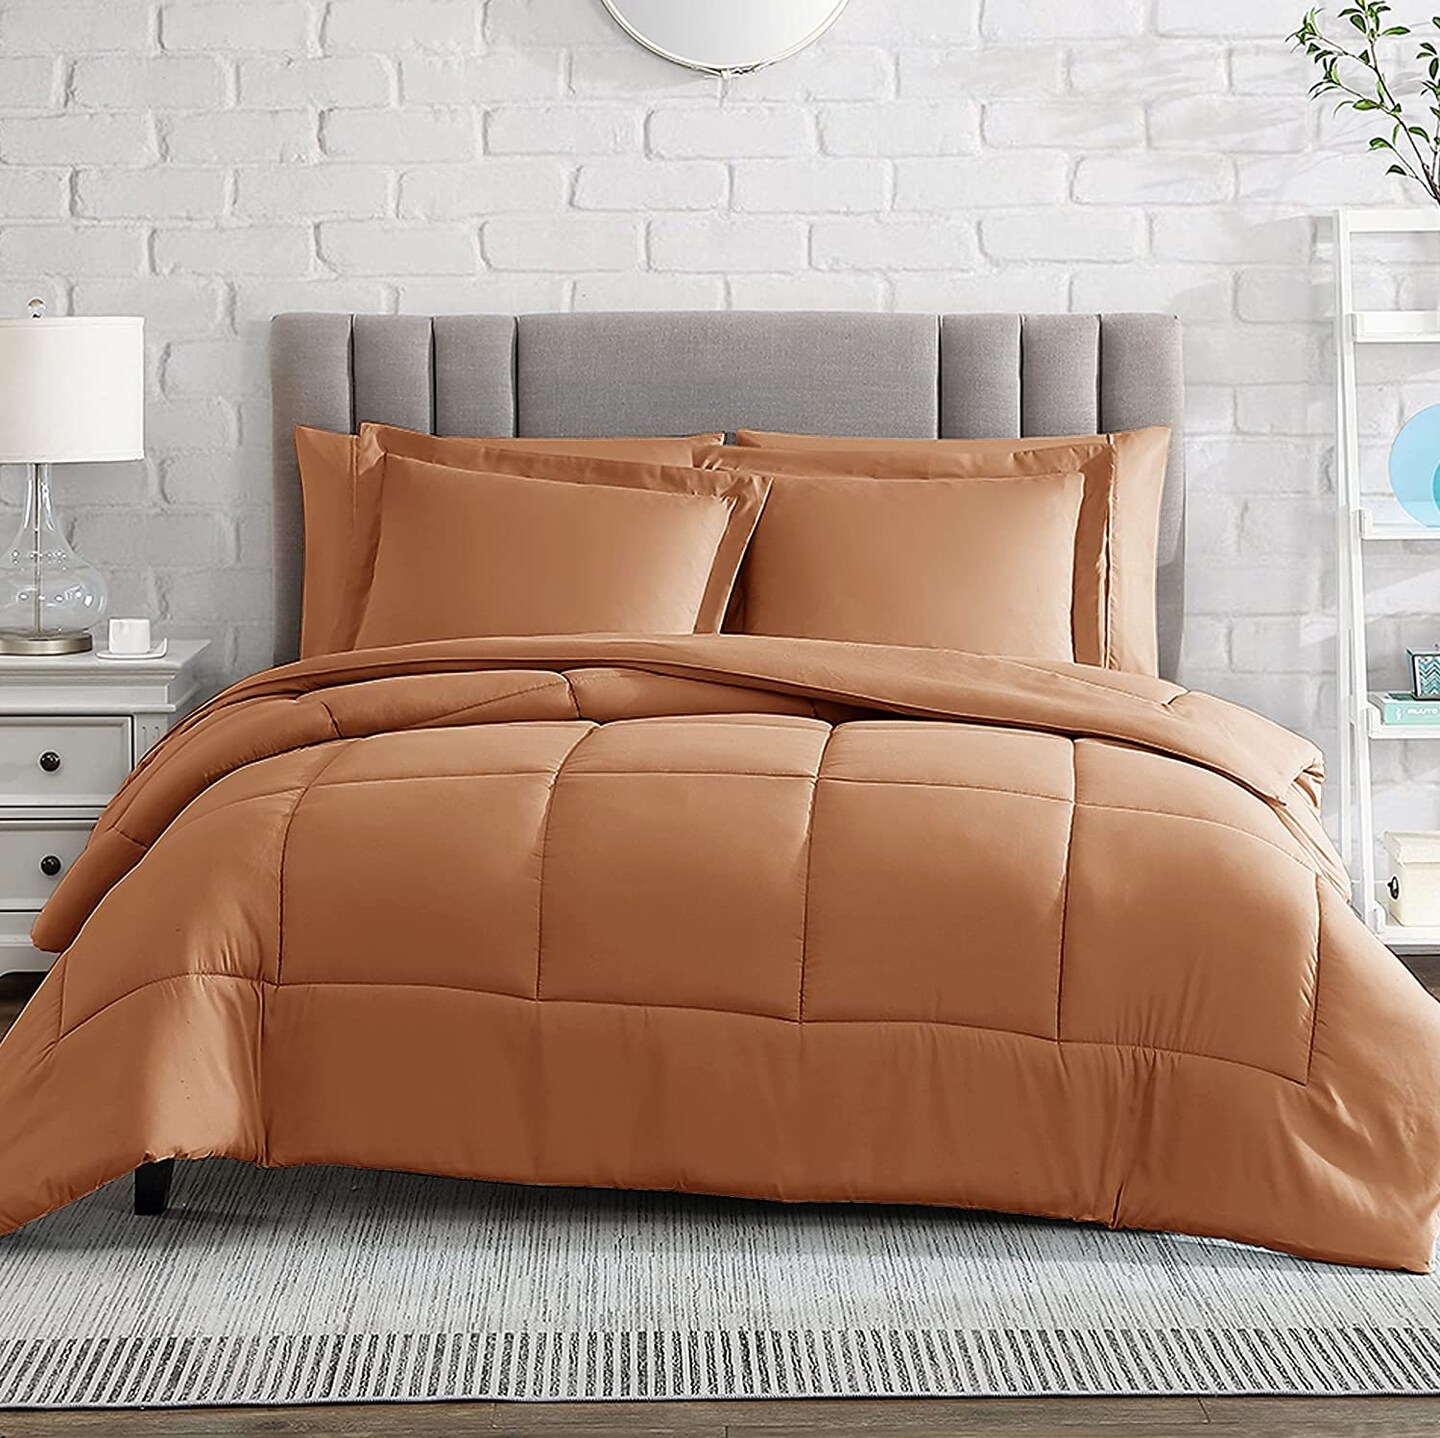 American Home Collection Down Alternative Comforter Set Extra Warm and Soft